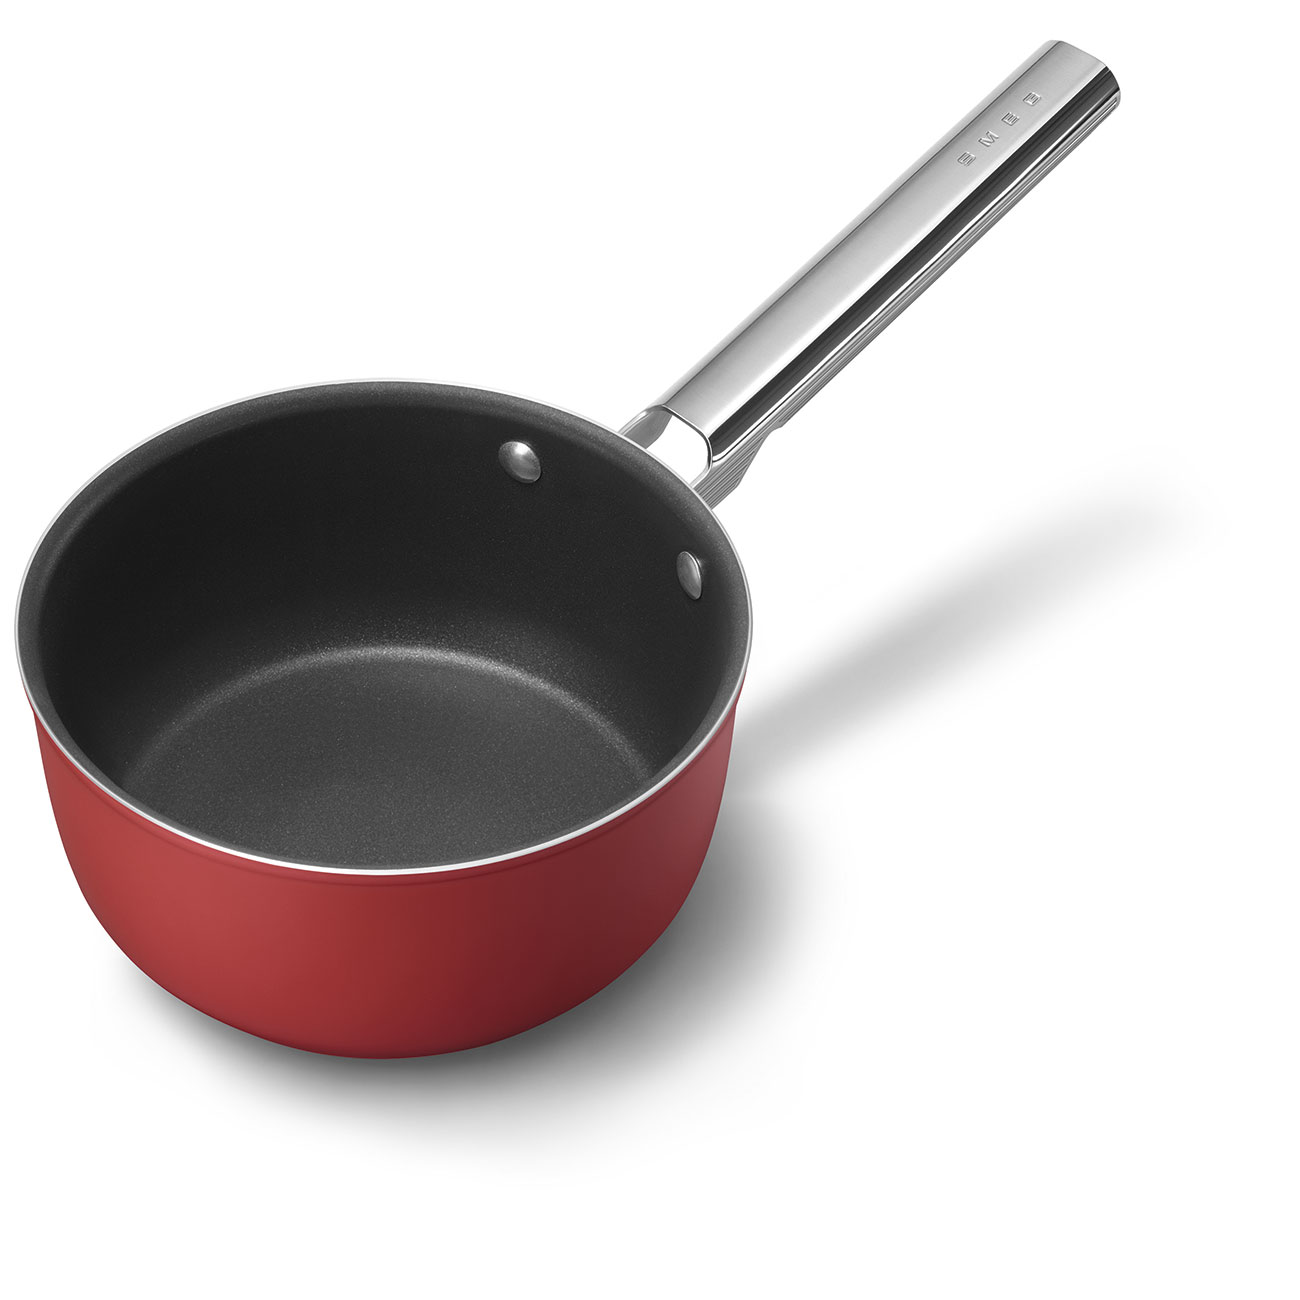 Smeg Red Non-stick Saucepan with glass lid and stainless steel handle_3